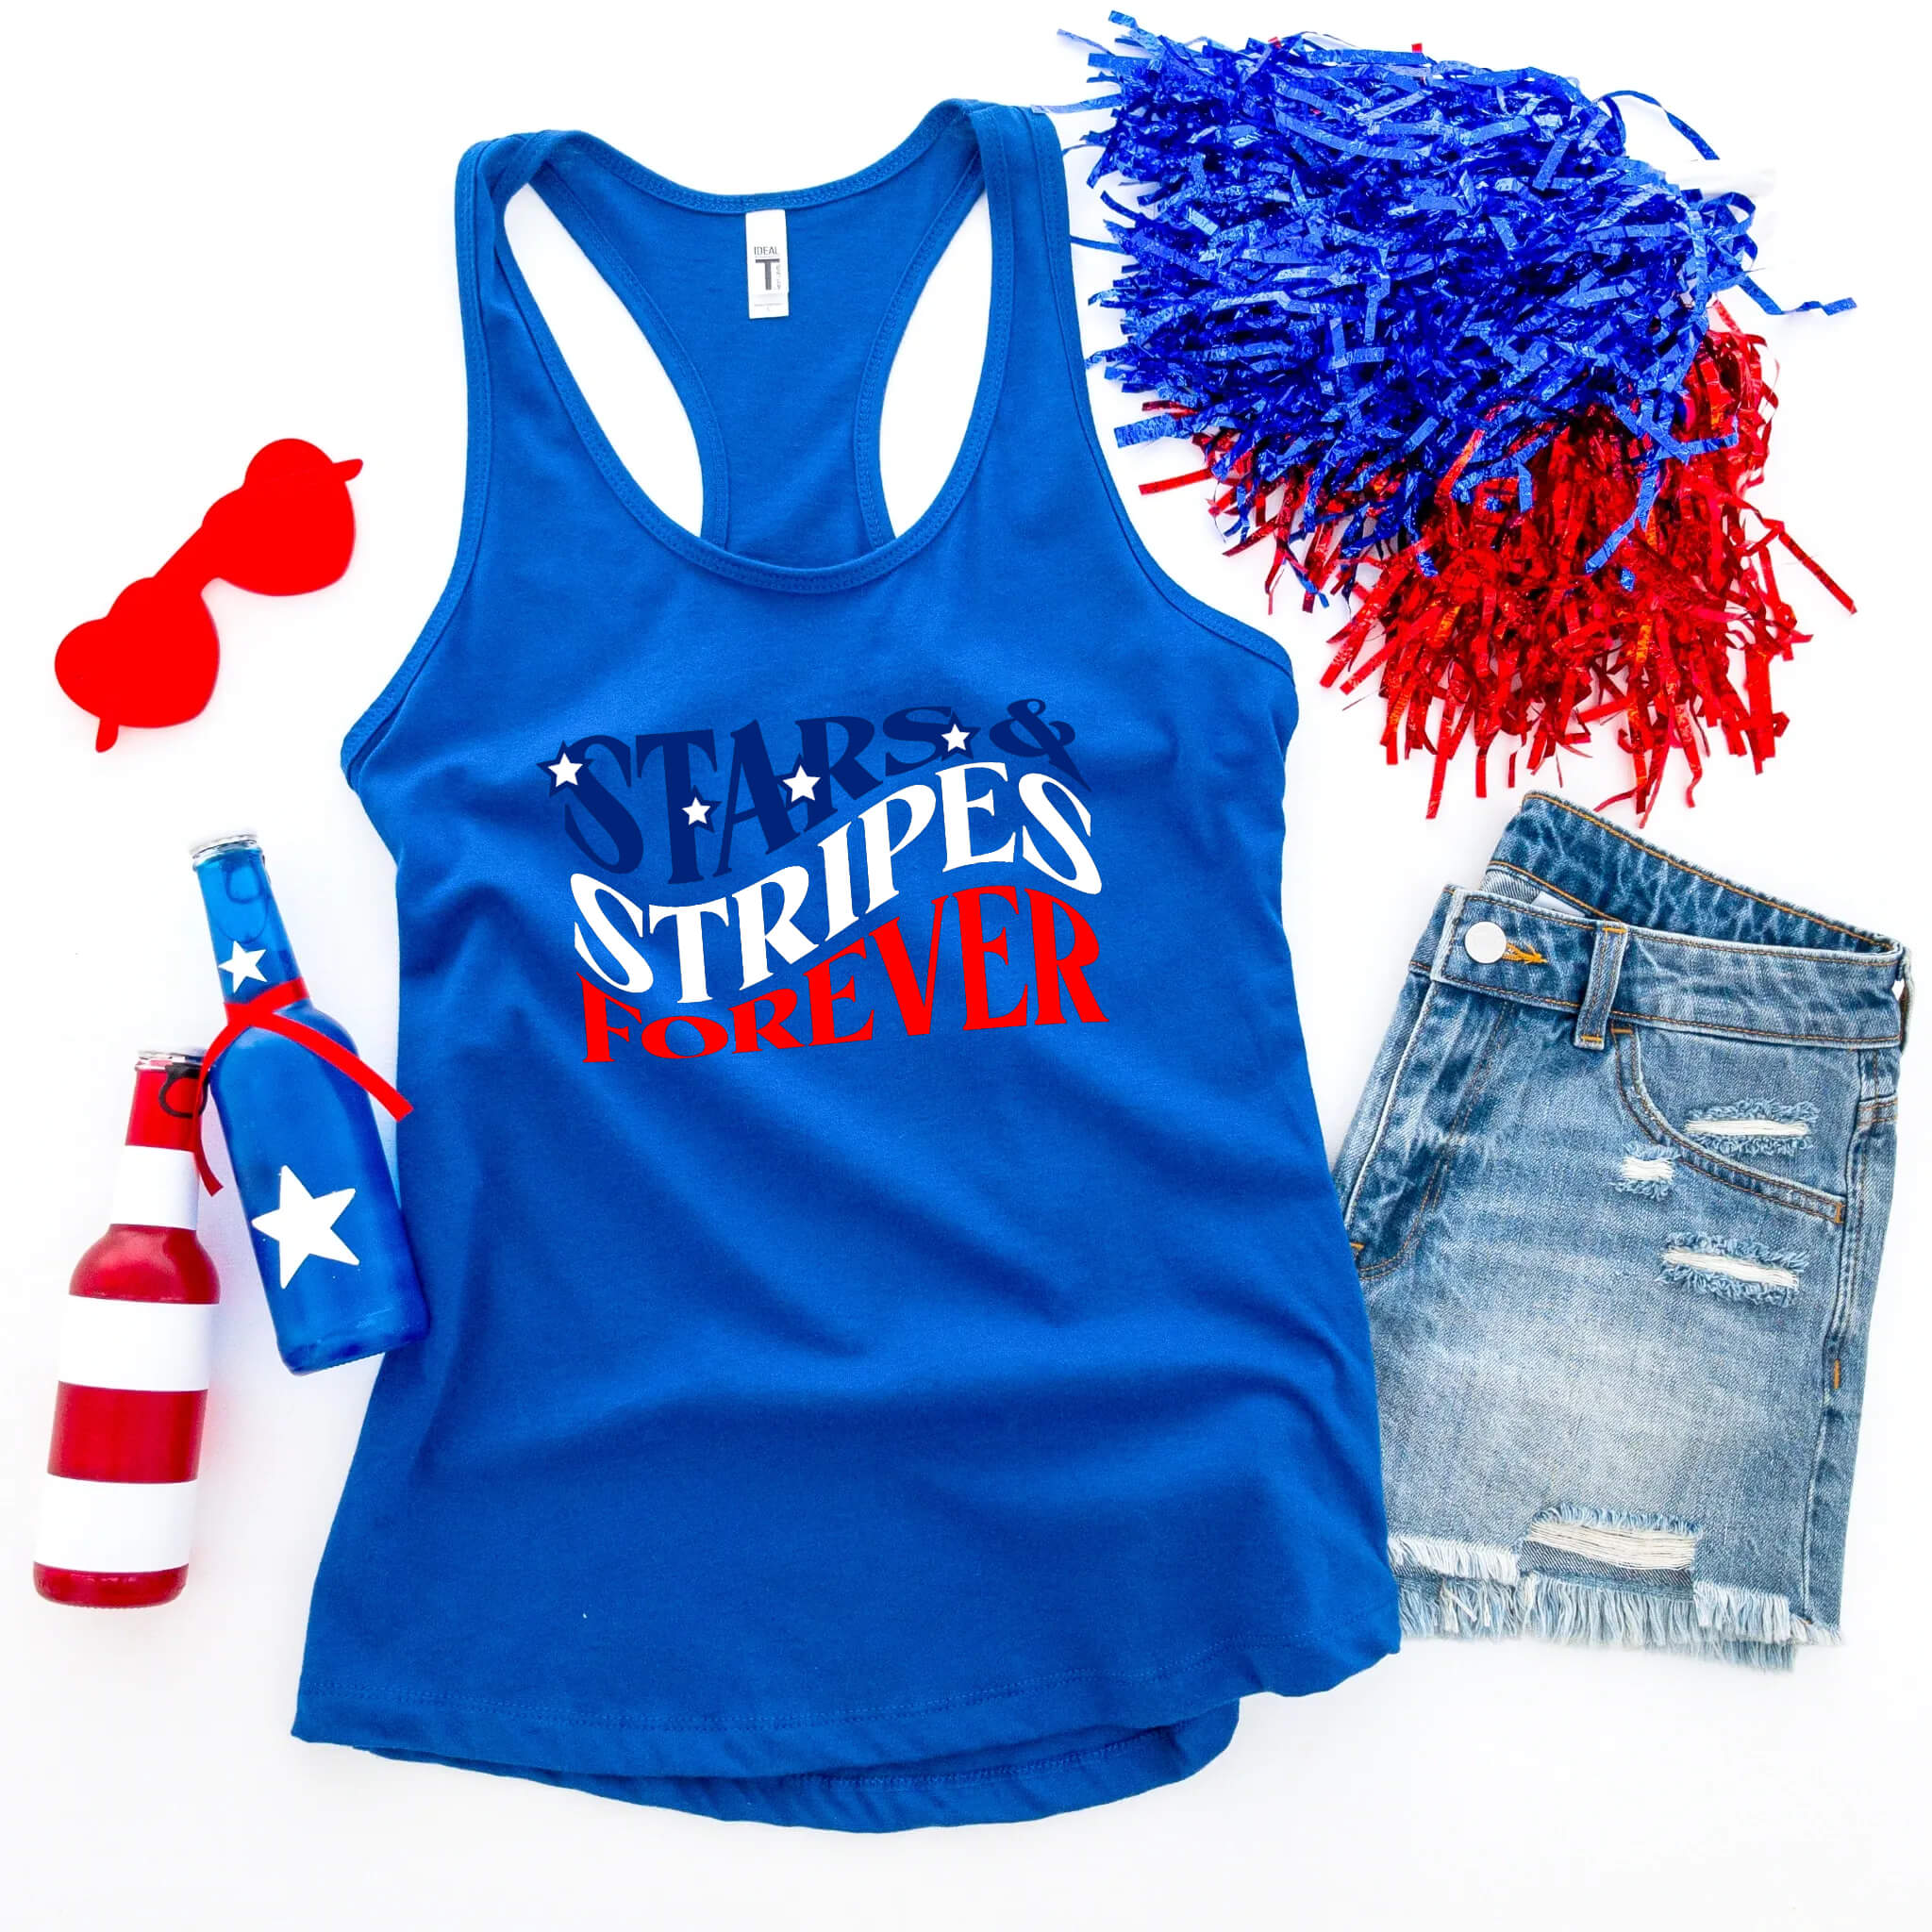 4th of July - Stars & Stripes Forever Patriotic Graphic Print Women’s T-Shirt / Tank Top